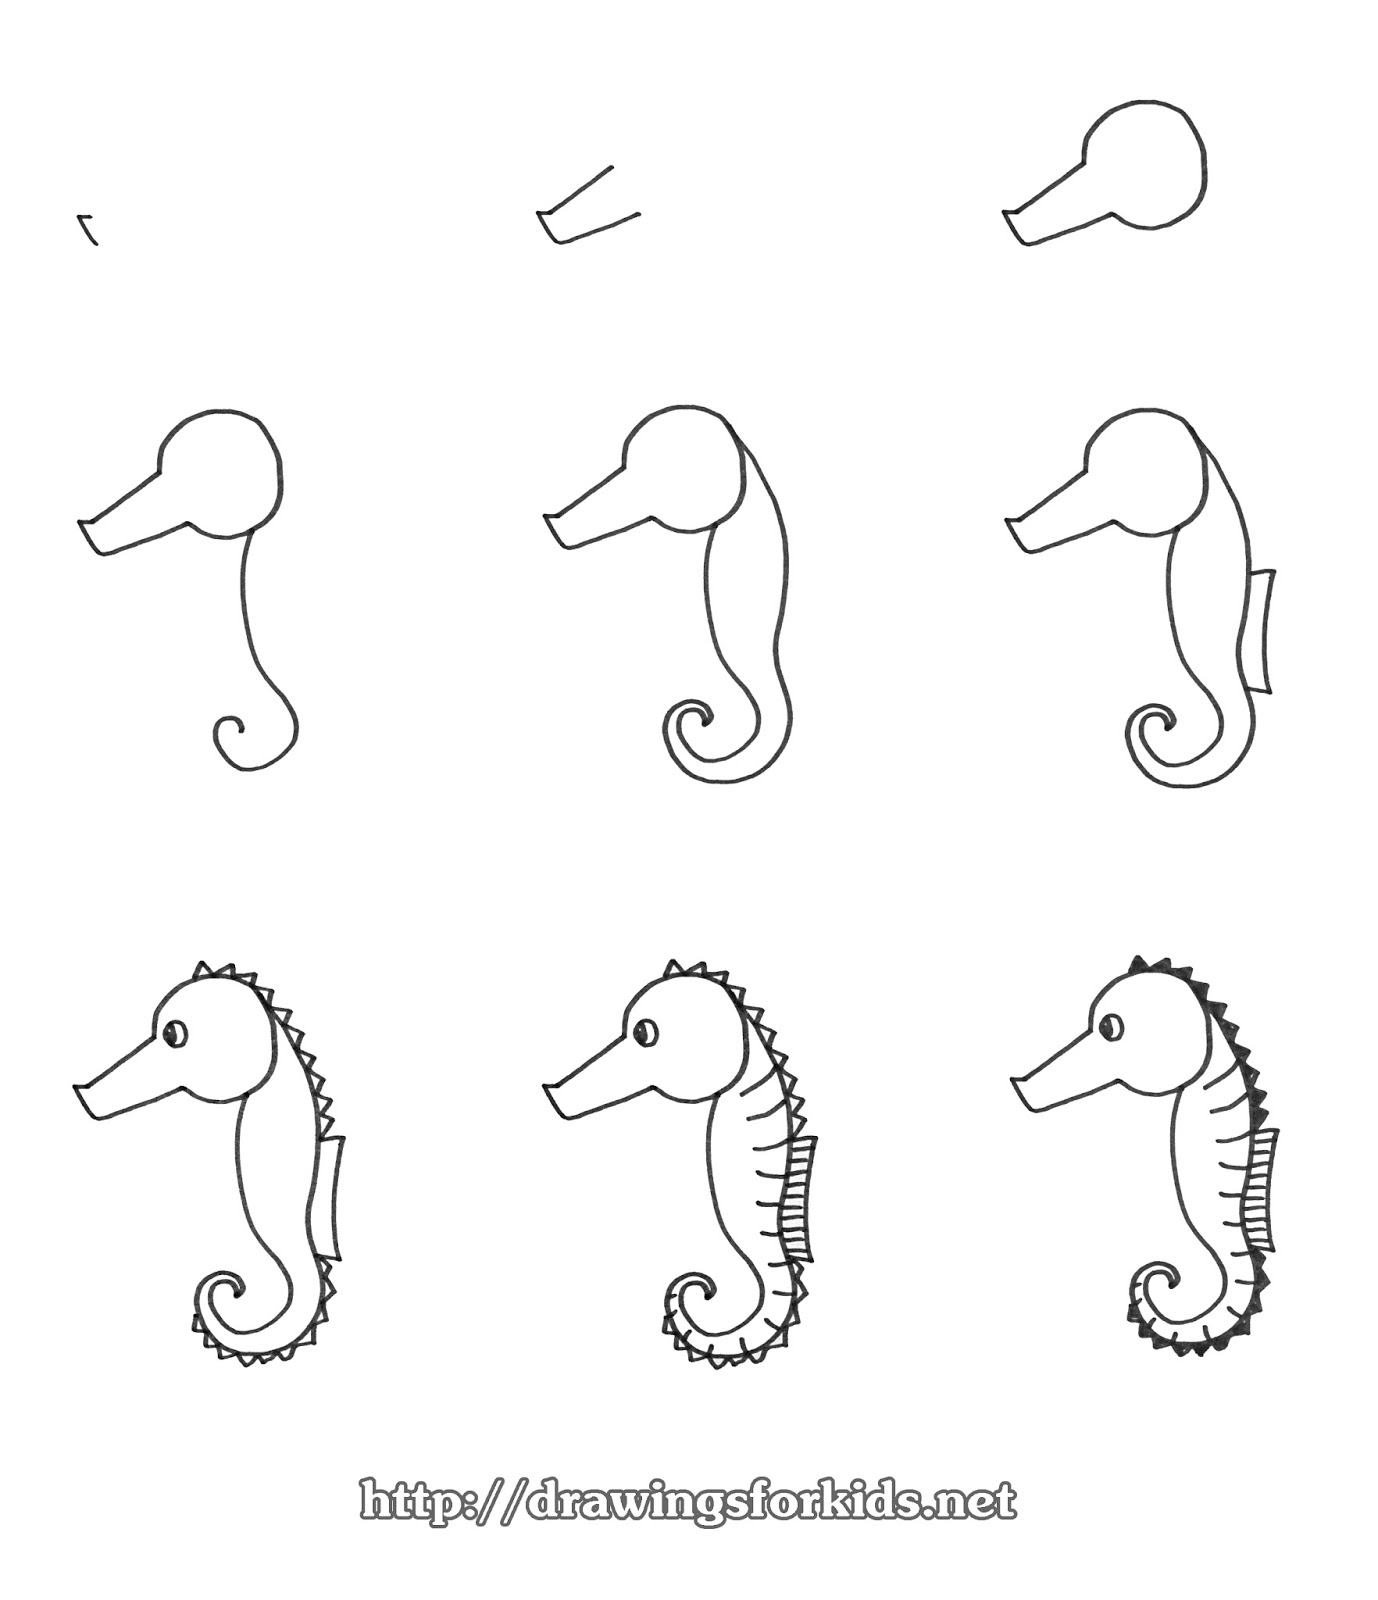 How to draw a Seahorses for kids - drawingsforkids.net